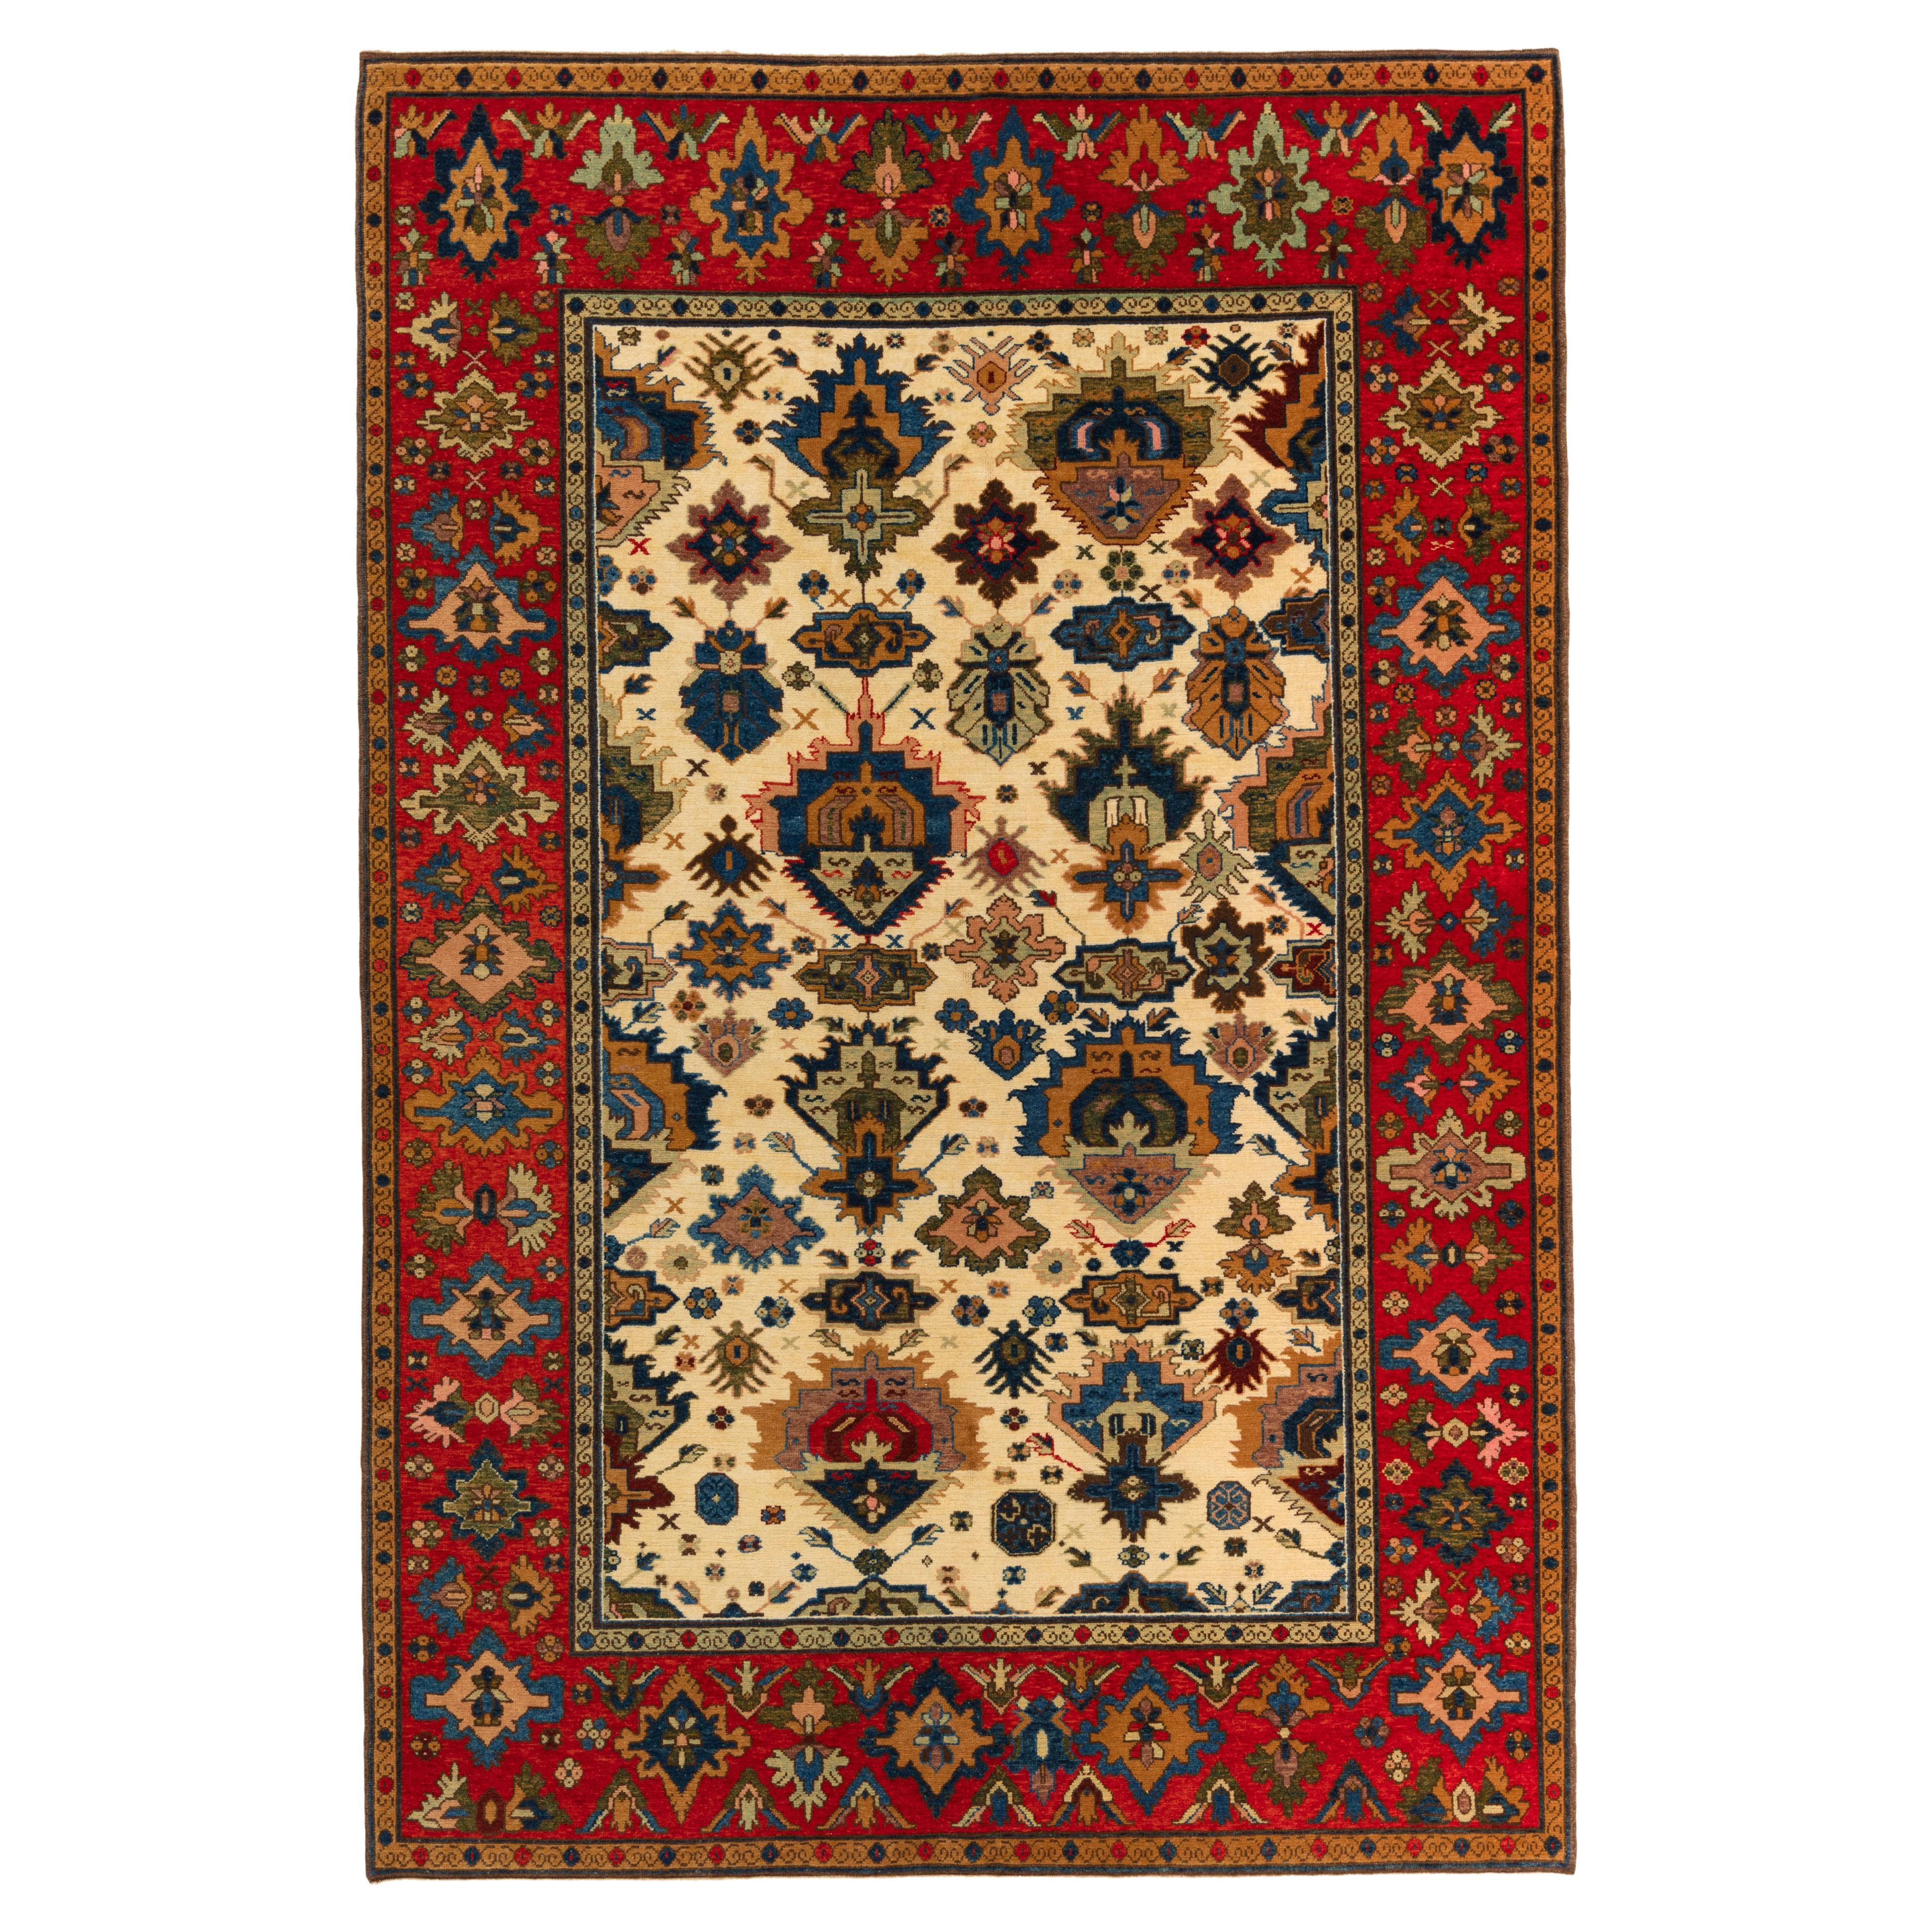 Ararat Rugs Palmettes in the Esfahan Manner Rug, Revival Carpet, Natural Dyed For Sale